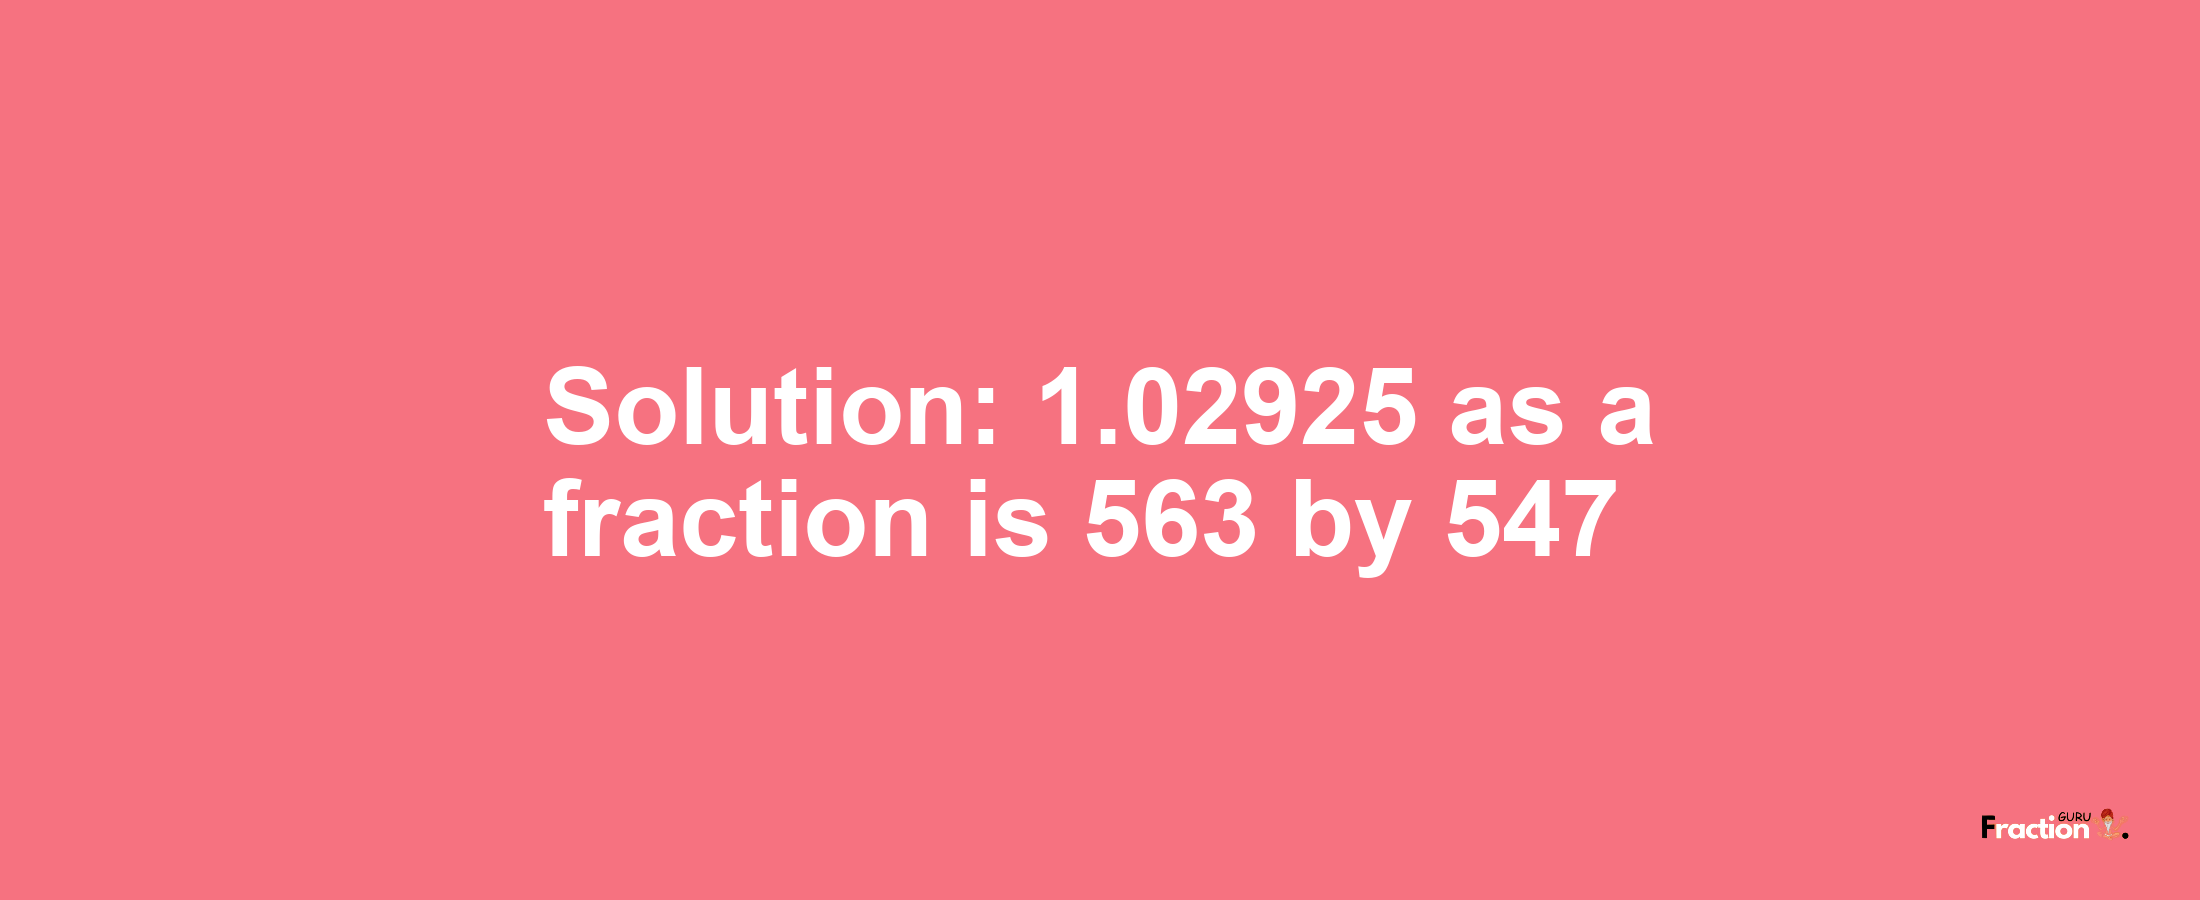 Solution:1.02925 as a fraction is 563/547